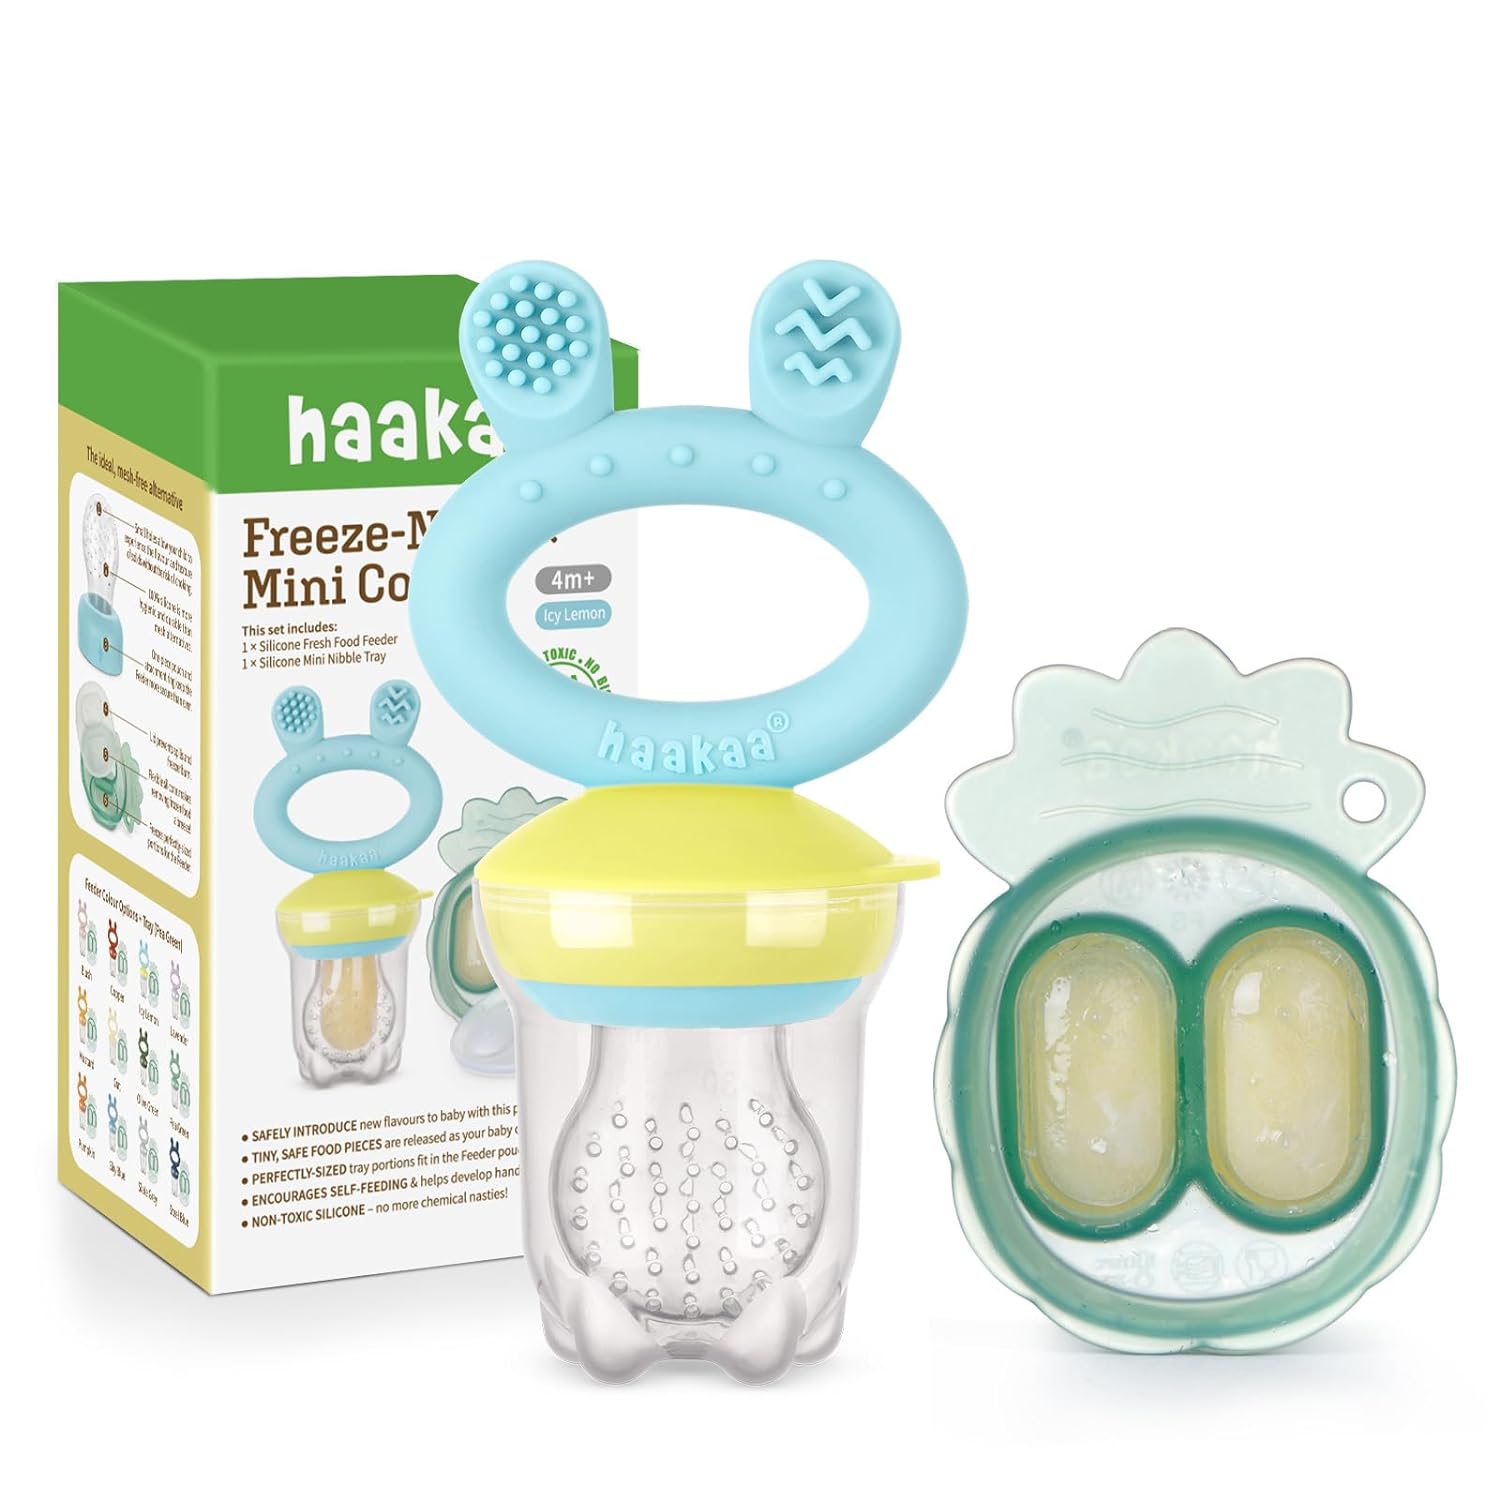 Haakaa Baby Fruit Food Feeder & Mini Freezer Nibble Tray Combo, Breastmilk Popsicle Molds for Baby Cooling Relief, BPA Free Silicone Feeder for Safe Infant Self Feeding, 4 Month+ (Blue)